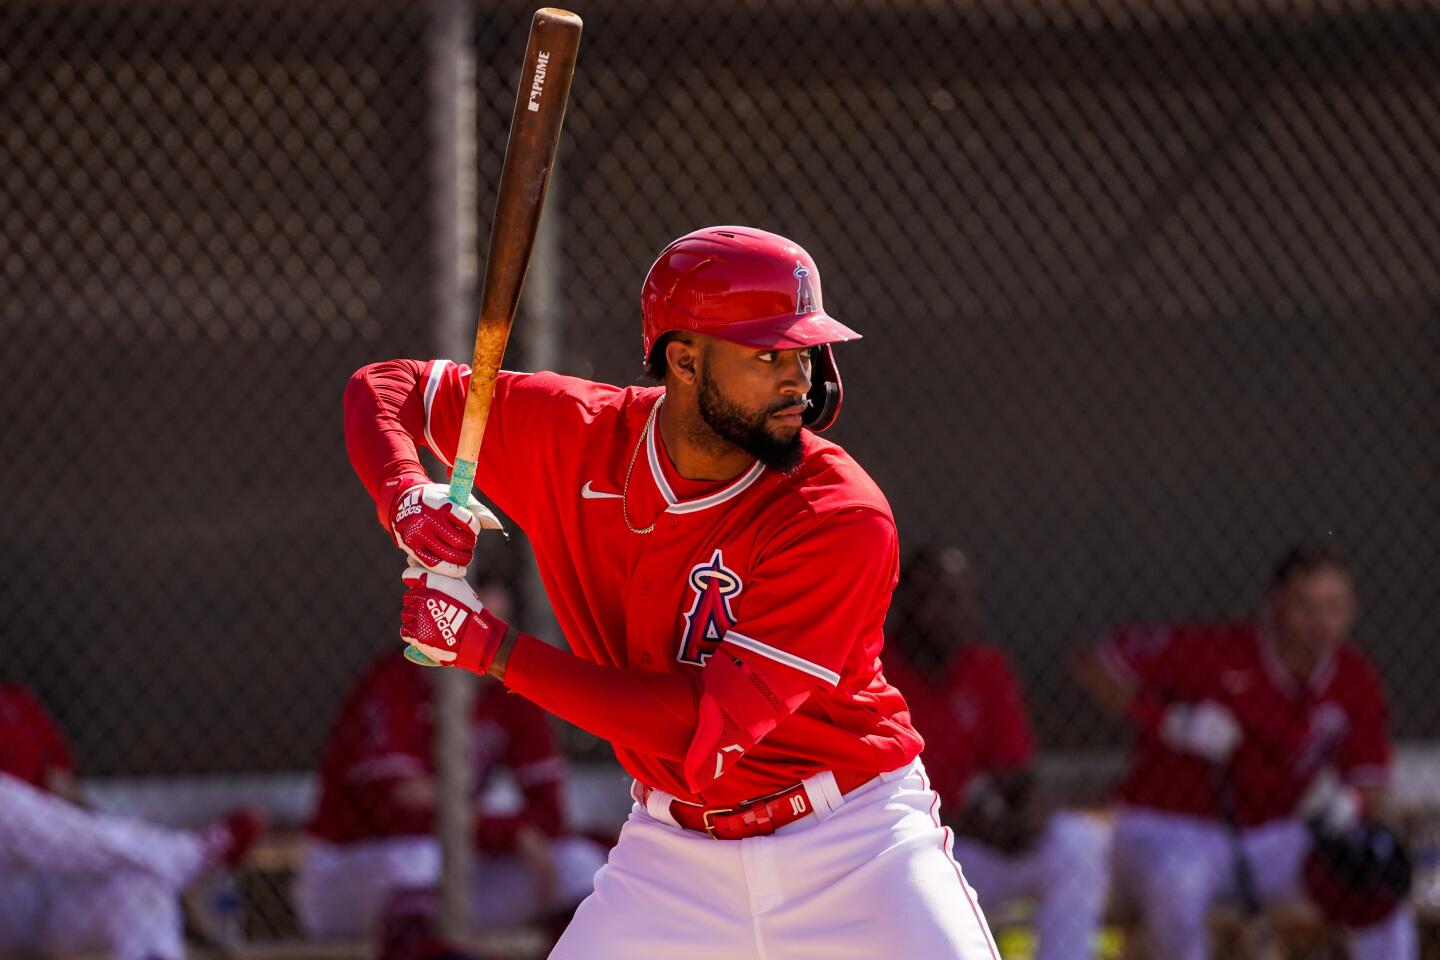 TEMPE, ARIZ. - FEBRUARY 18: Los Angeles Angels Jo Adell (59) at bat during live batting practice during Spring Training.